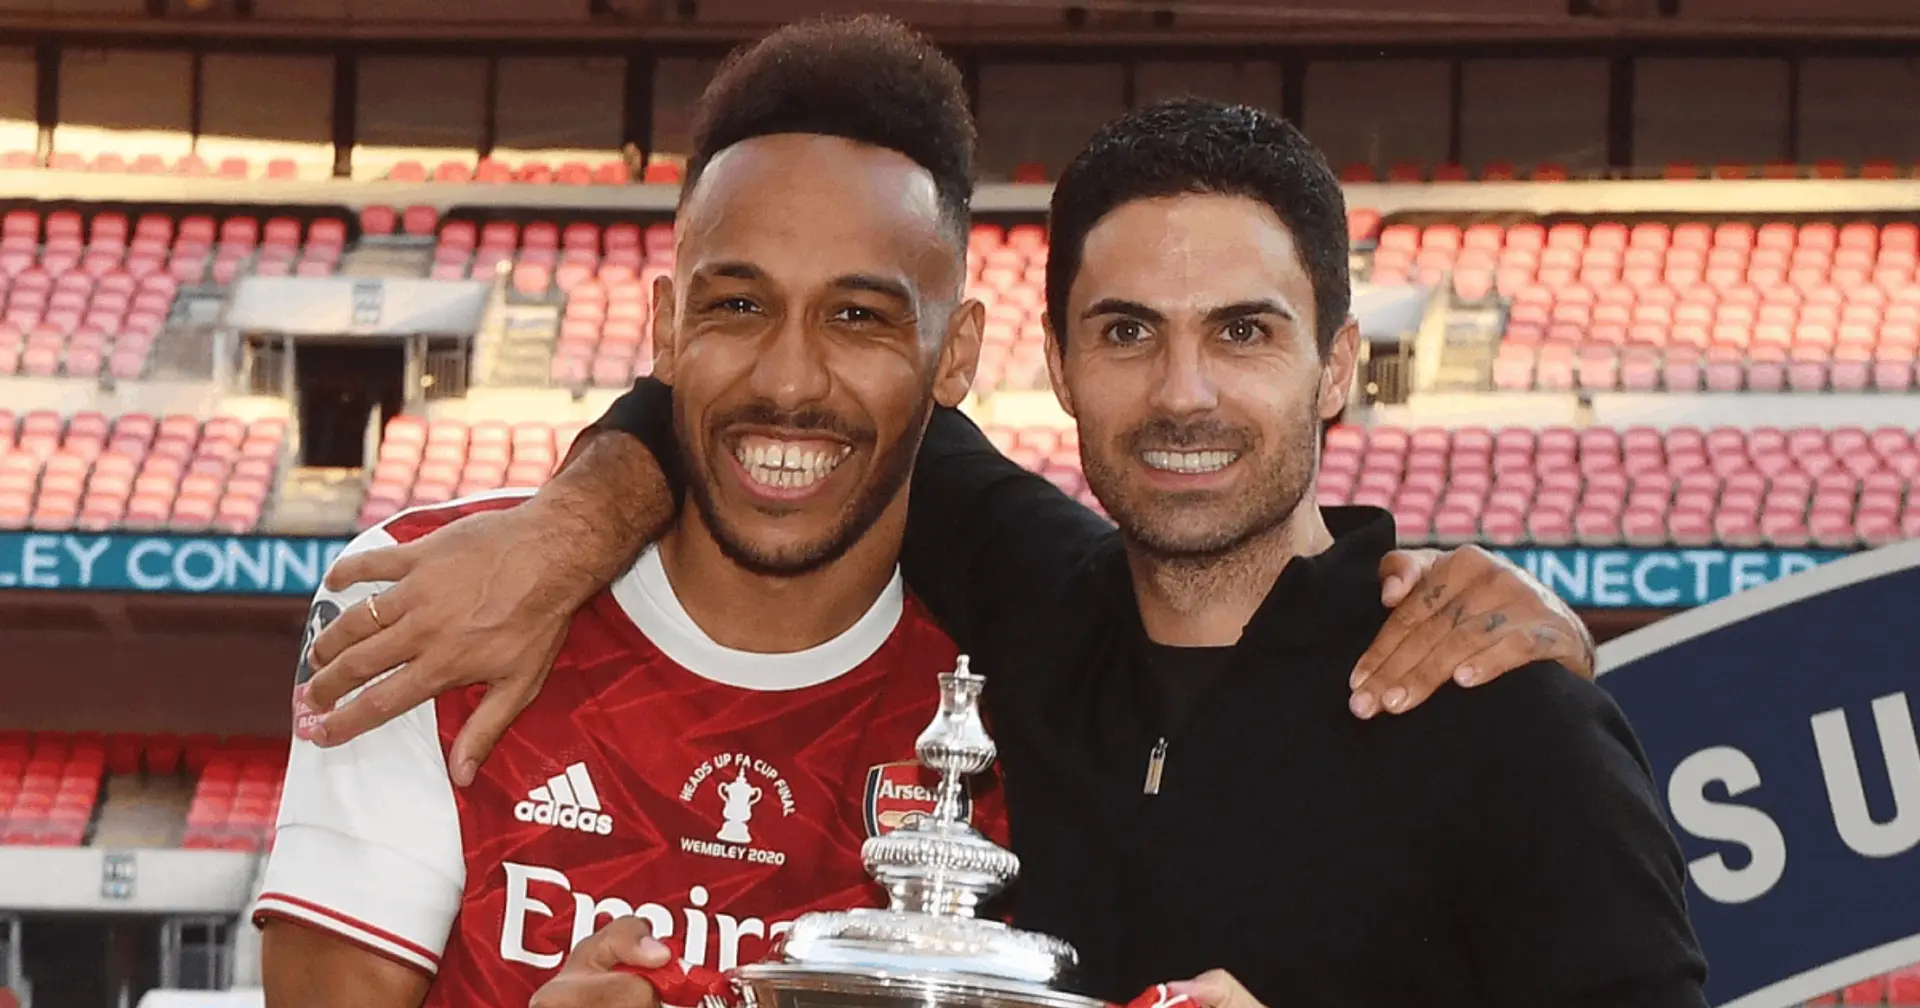 'Keep calm and trust the process': Fan defends Arteta amid criticism and urges Gooners to unite in support of Auba 